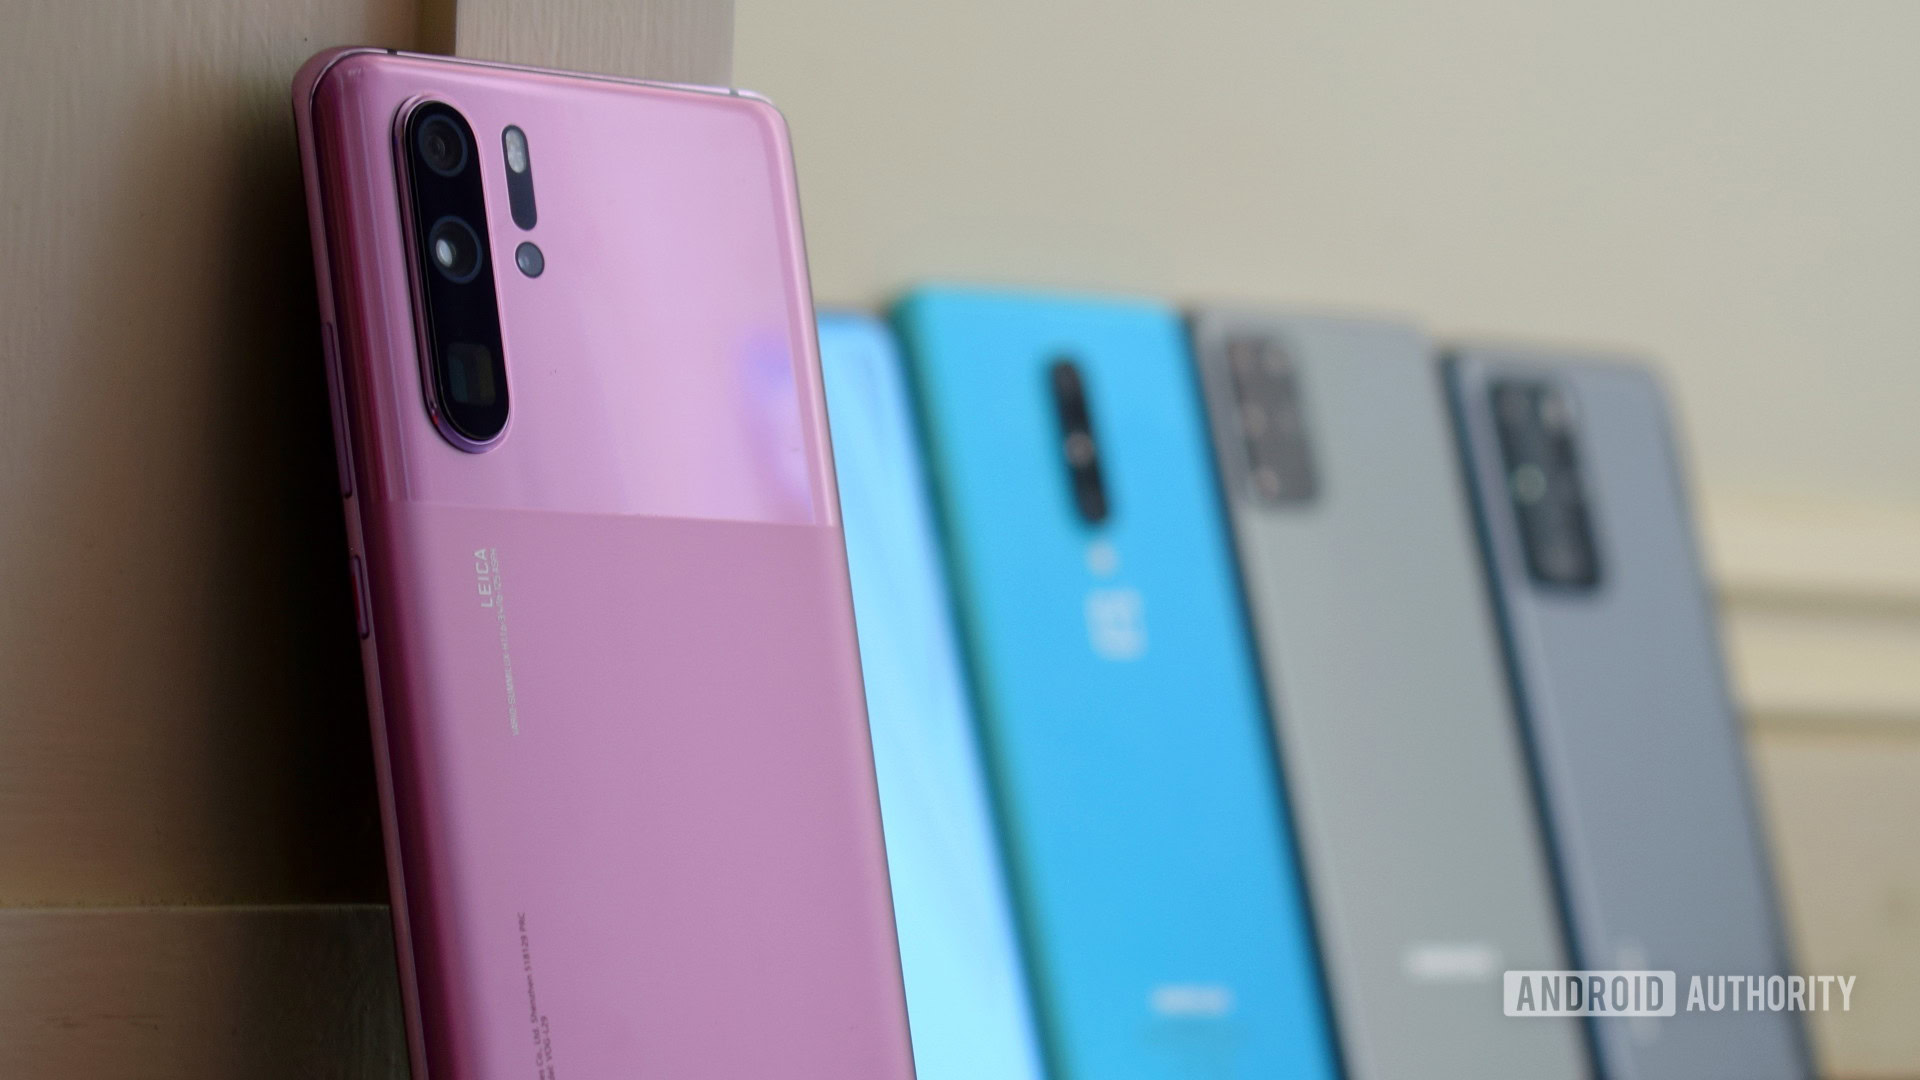 Huawei P30 Pro review: much more than just the best camera